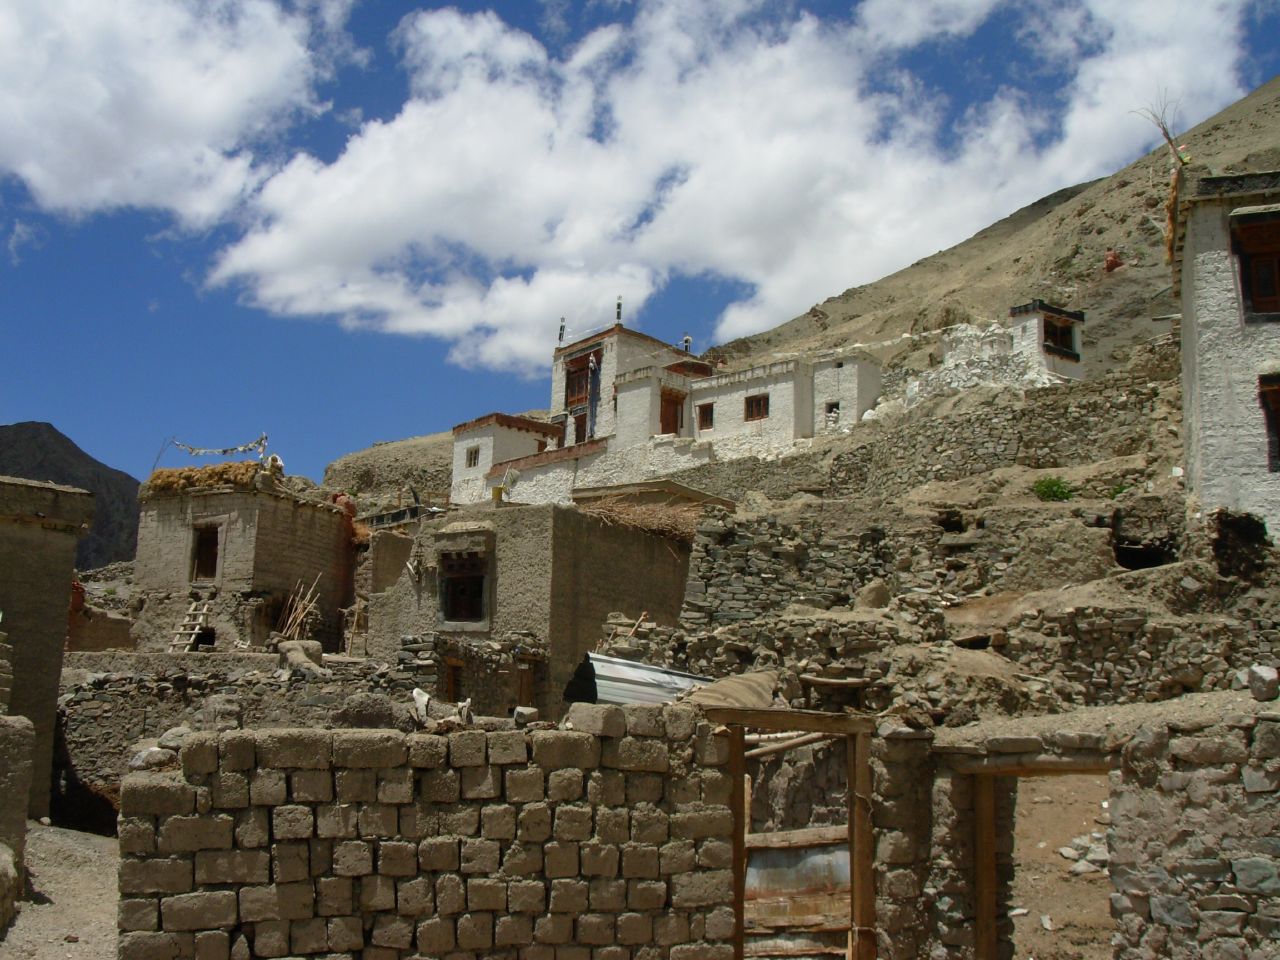 buildings of various heights in an arid area of stone